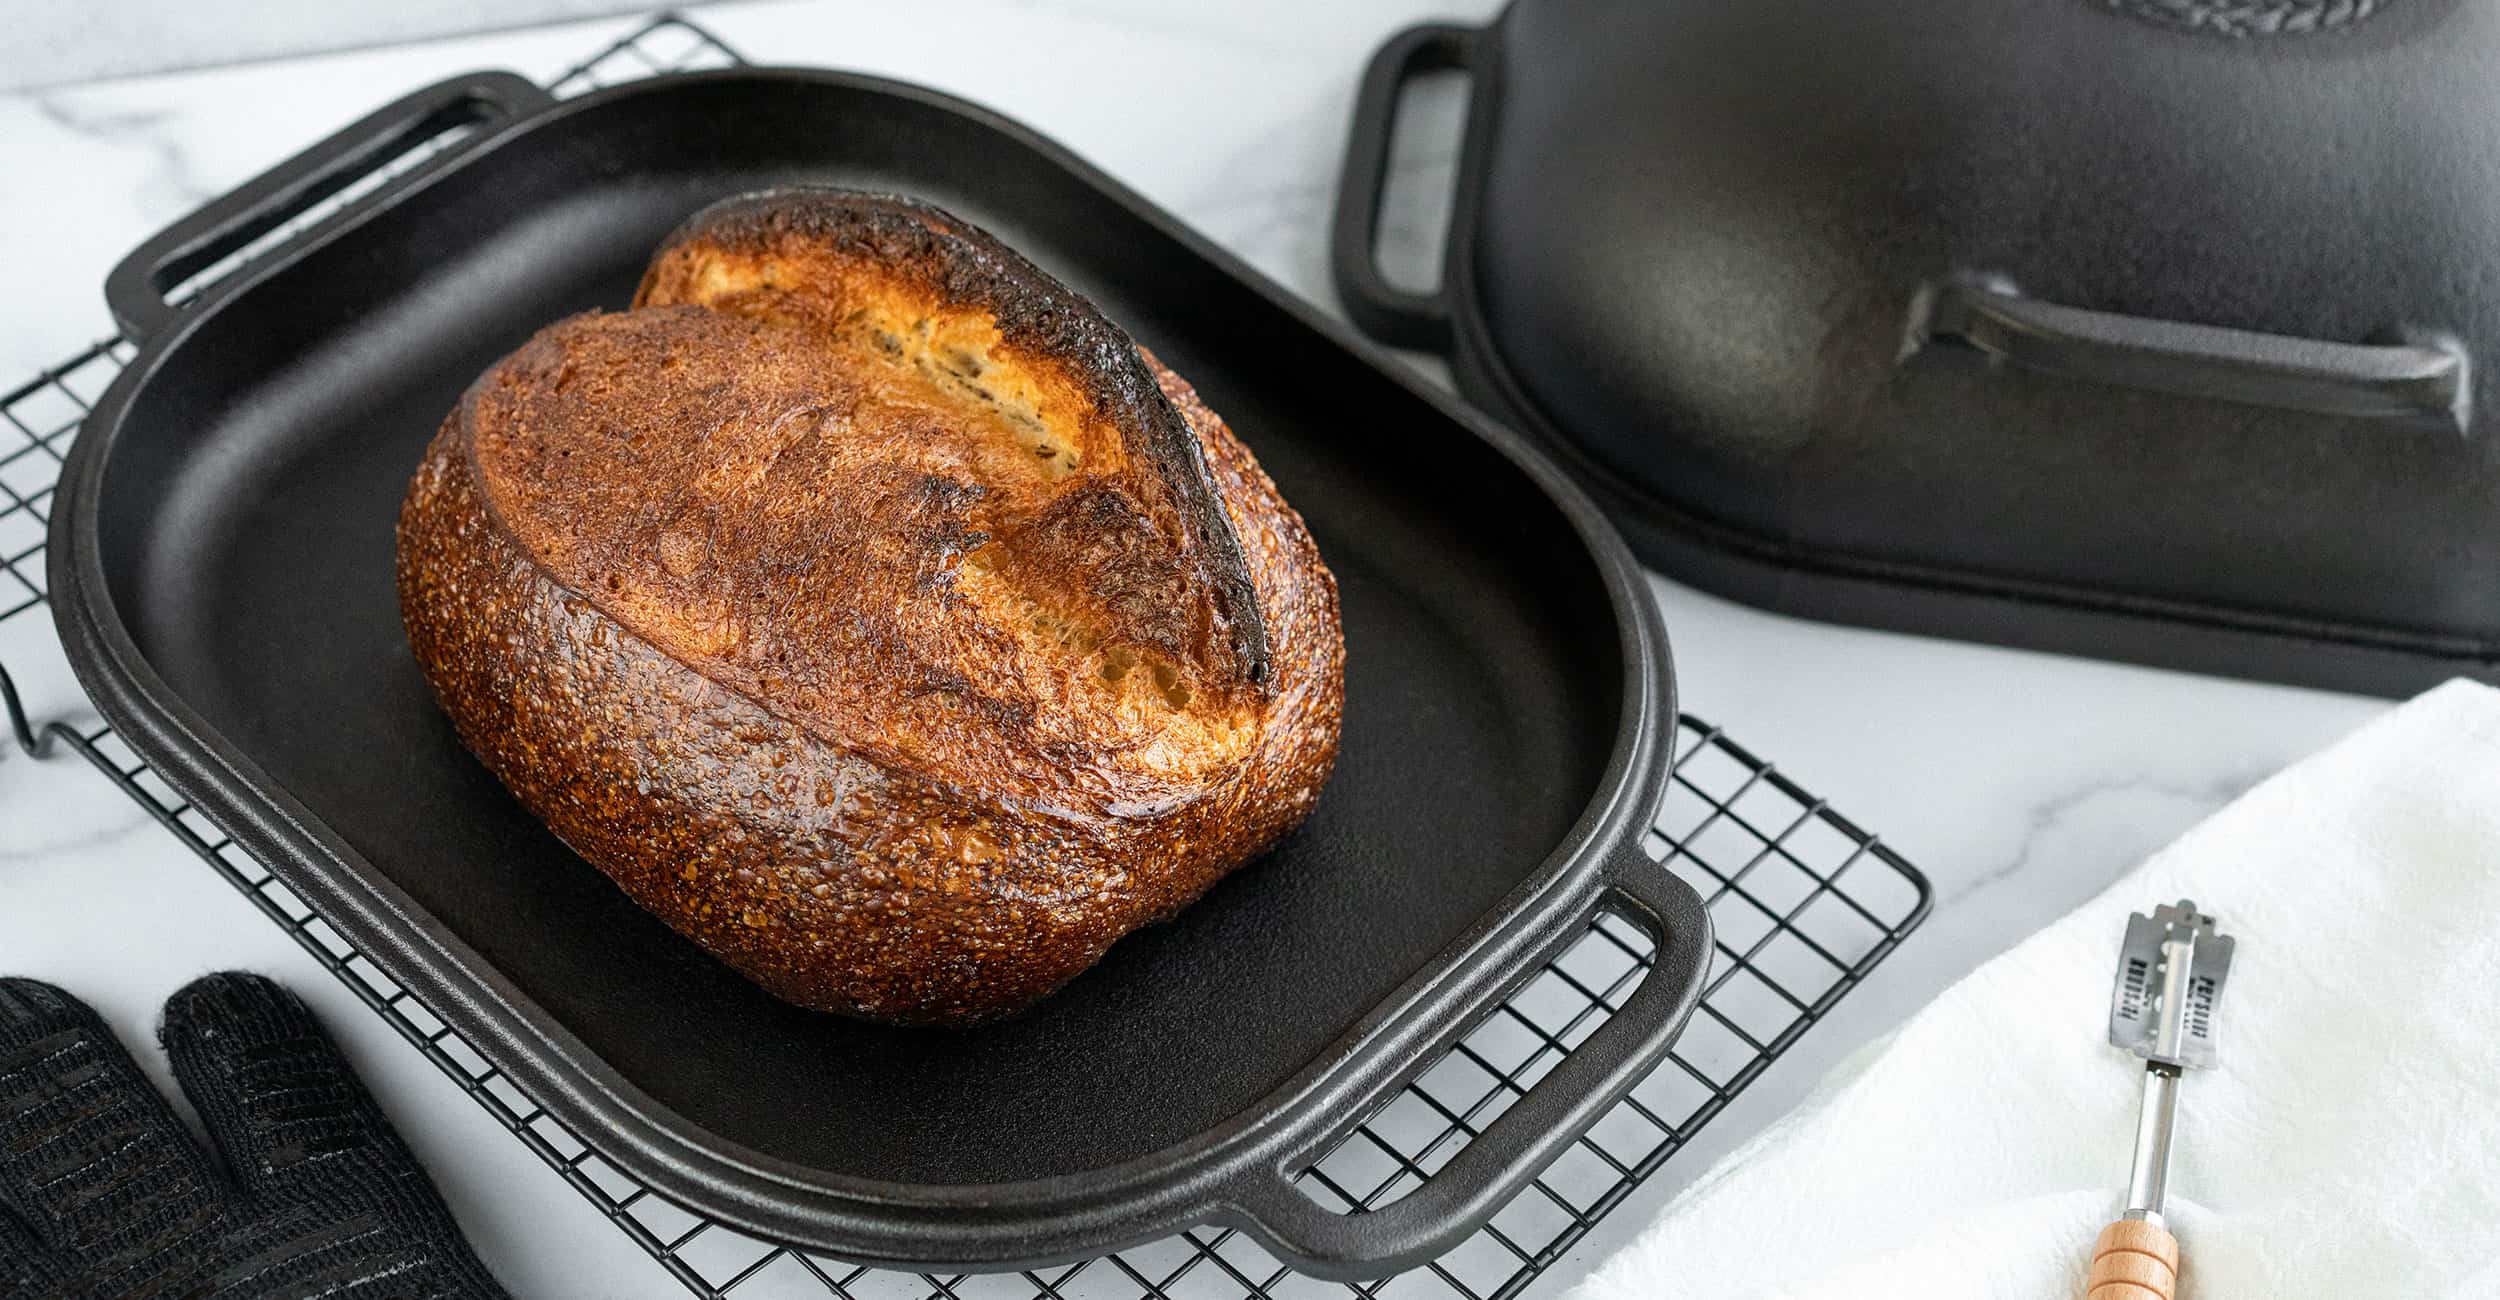 Baking Better Bread at Home